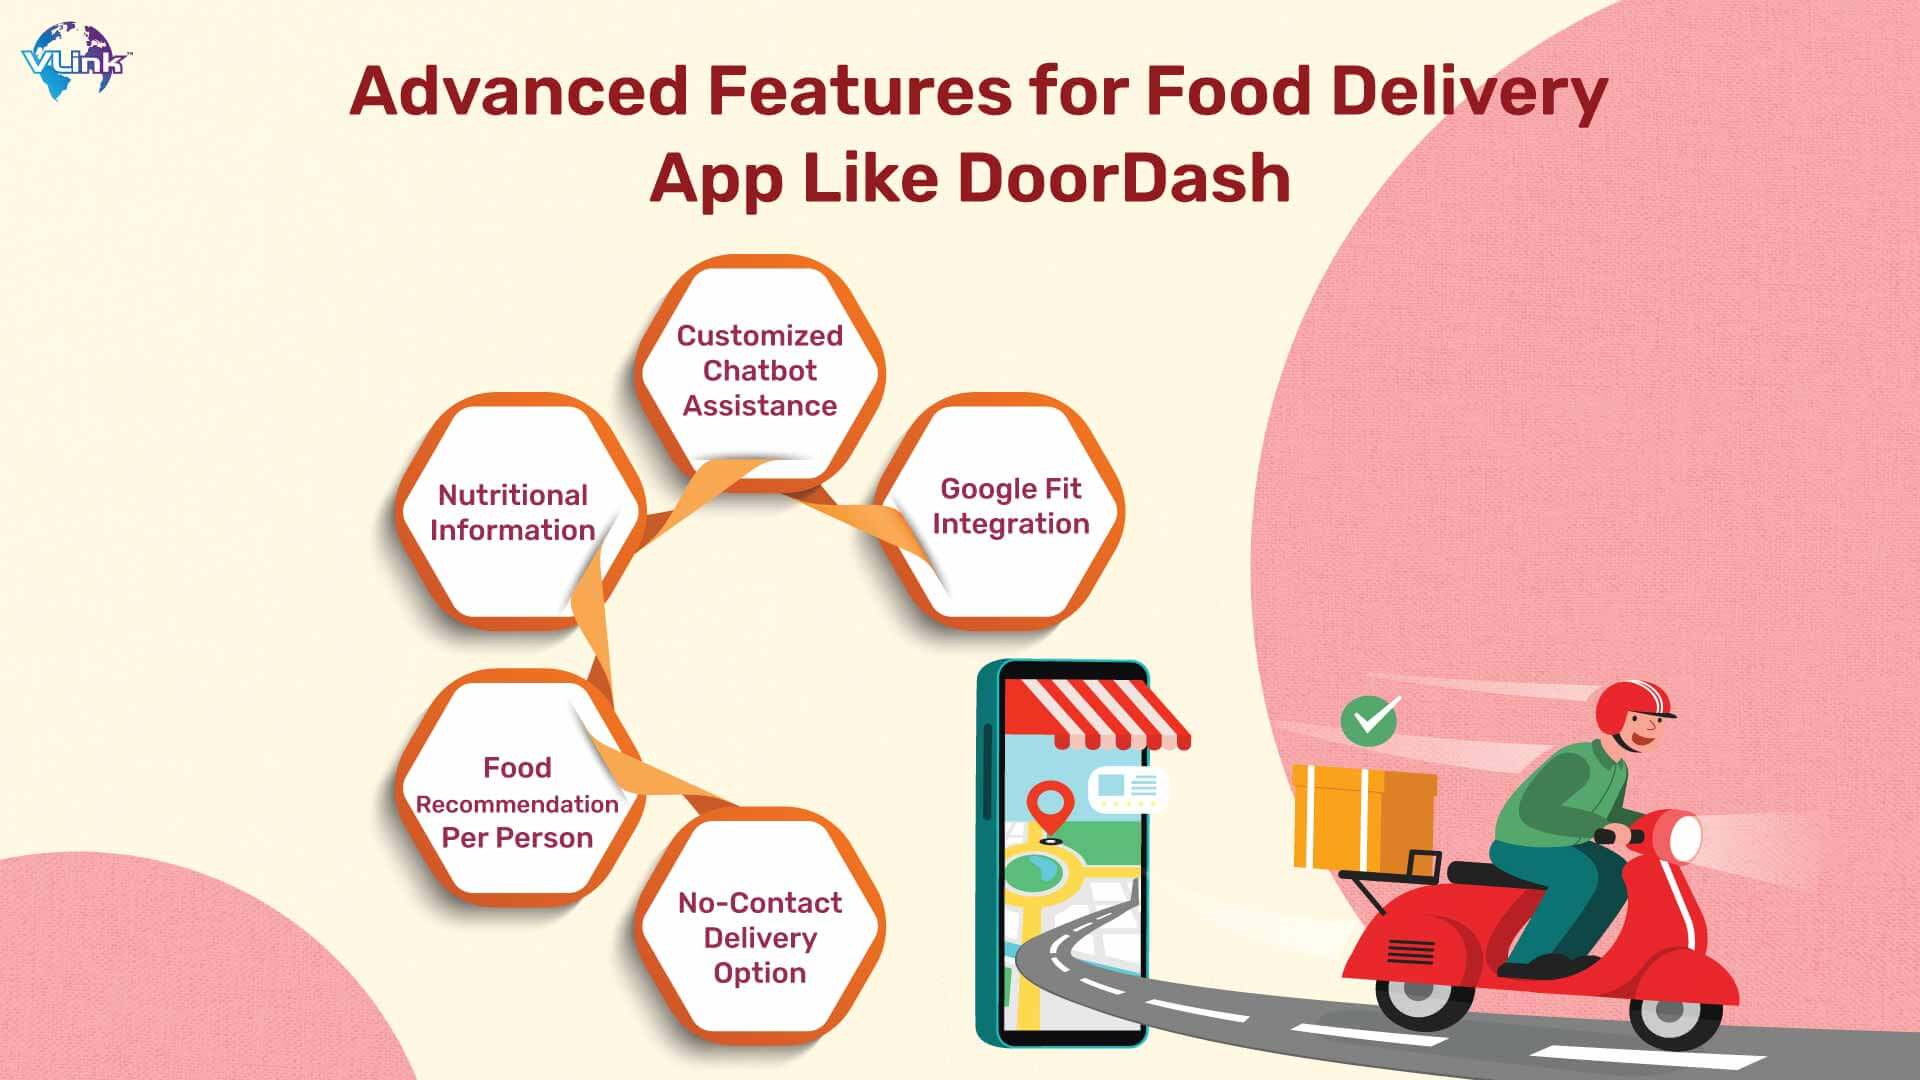 Advanced features of DoorDash, like the food delivery app